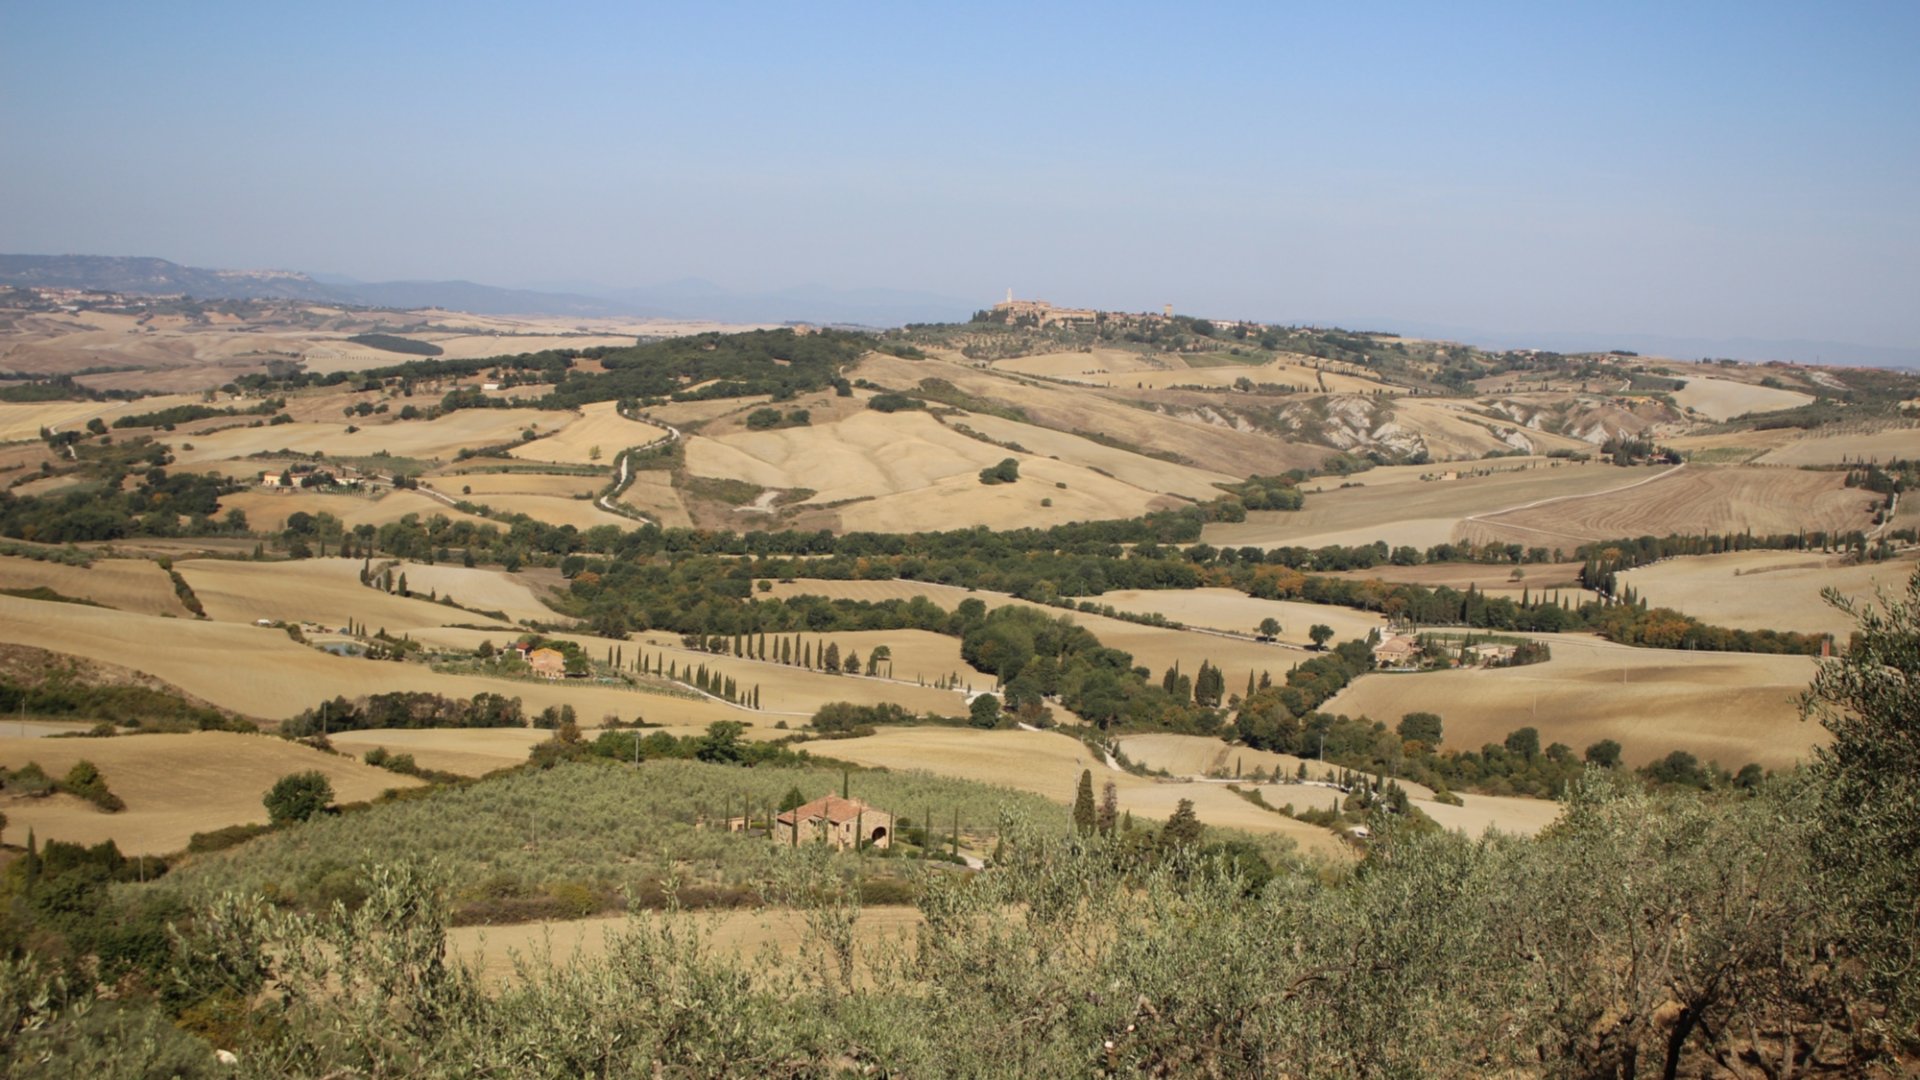 Riding through the Val d'Orcia on two wheels